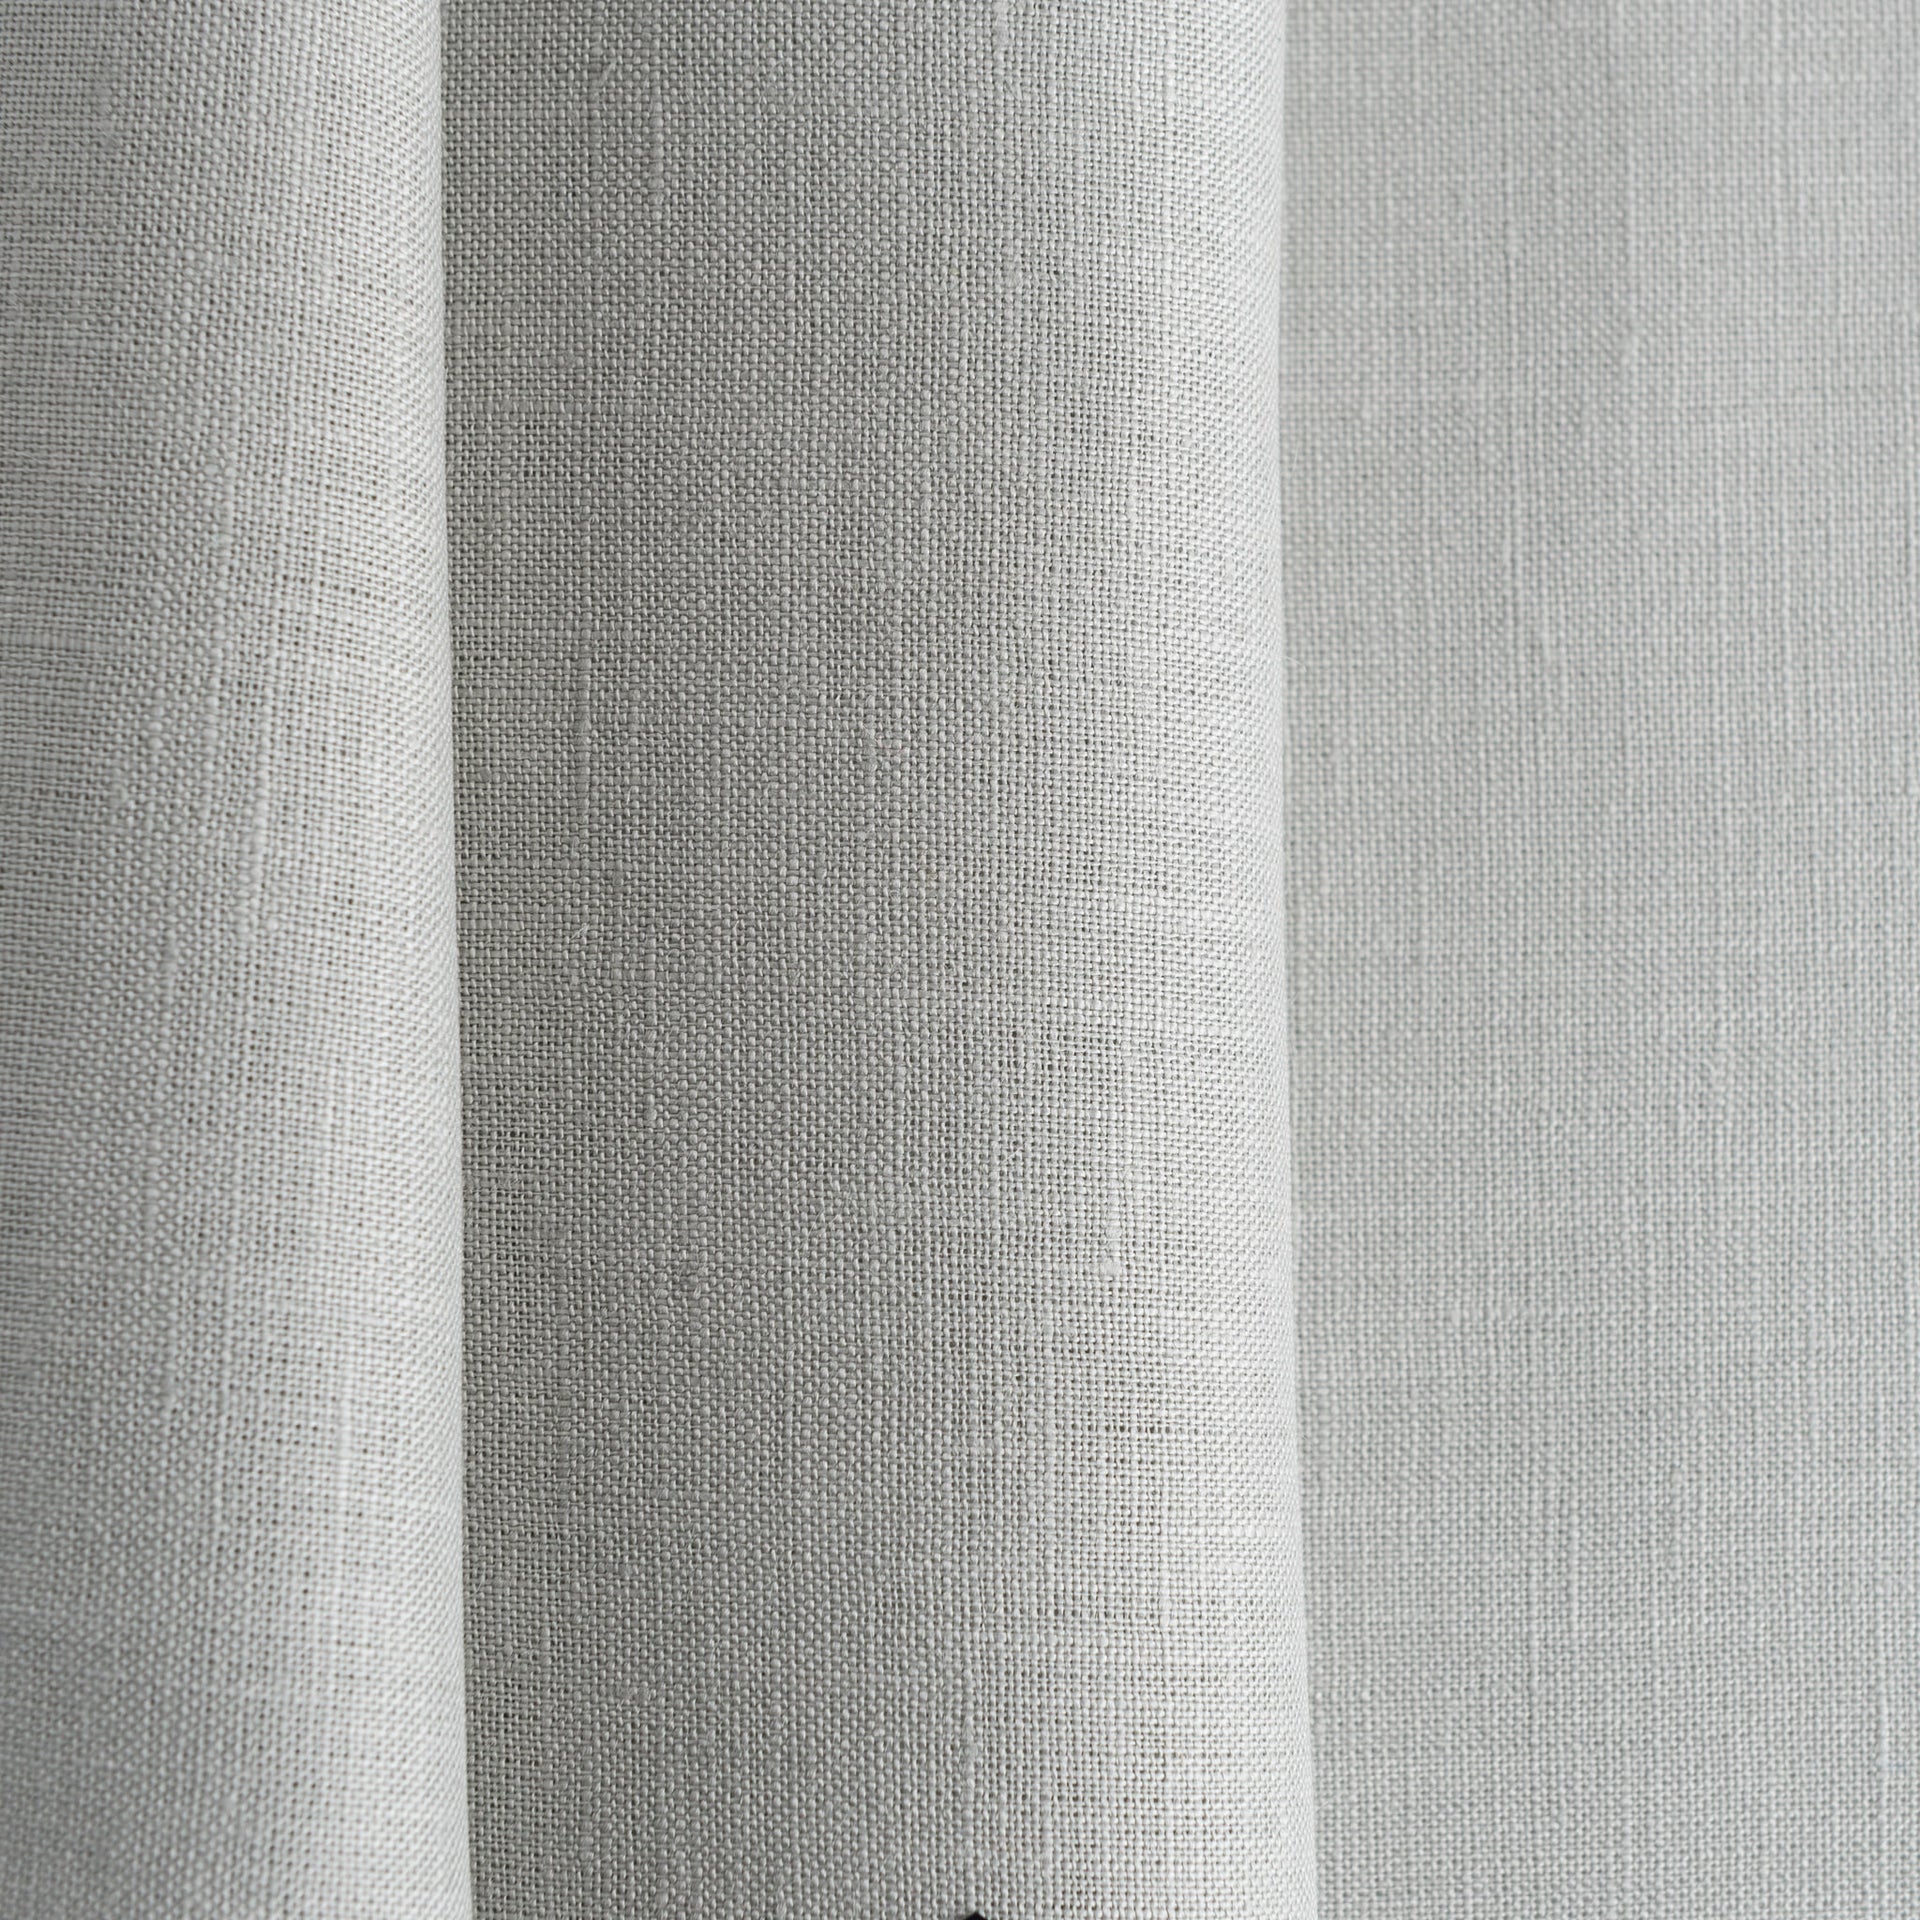 Double Pinch Pleat Grey Linen Curtain Panel with Blackout Lining - Custom Sizes & Colours, Color: Stone Grey